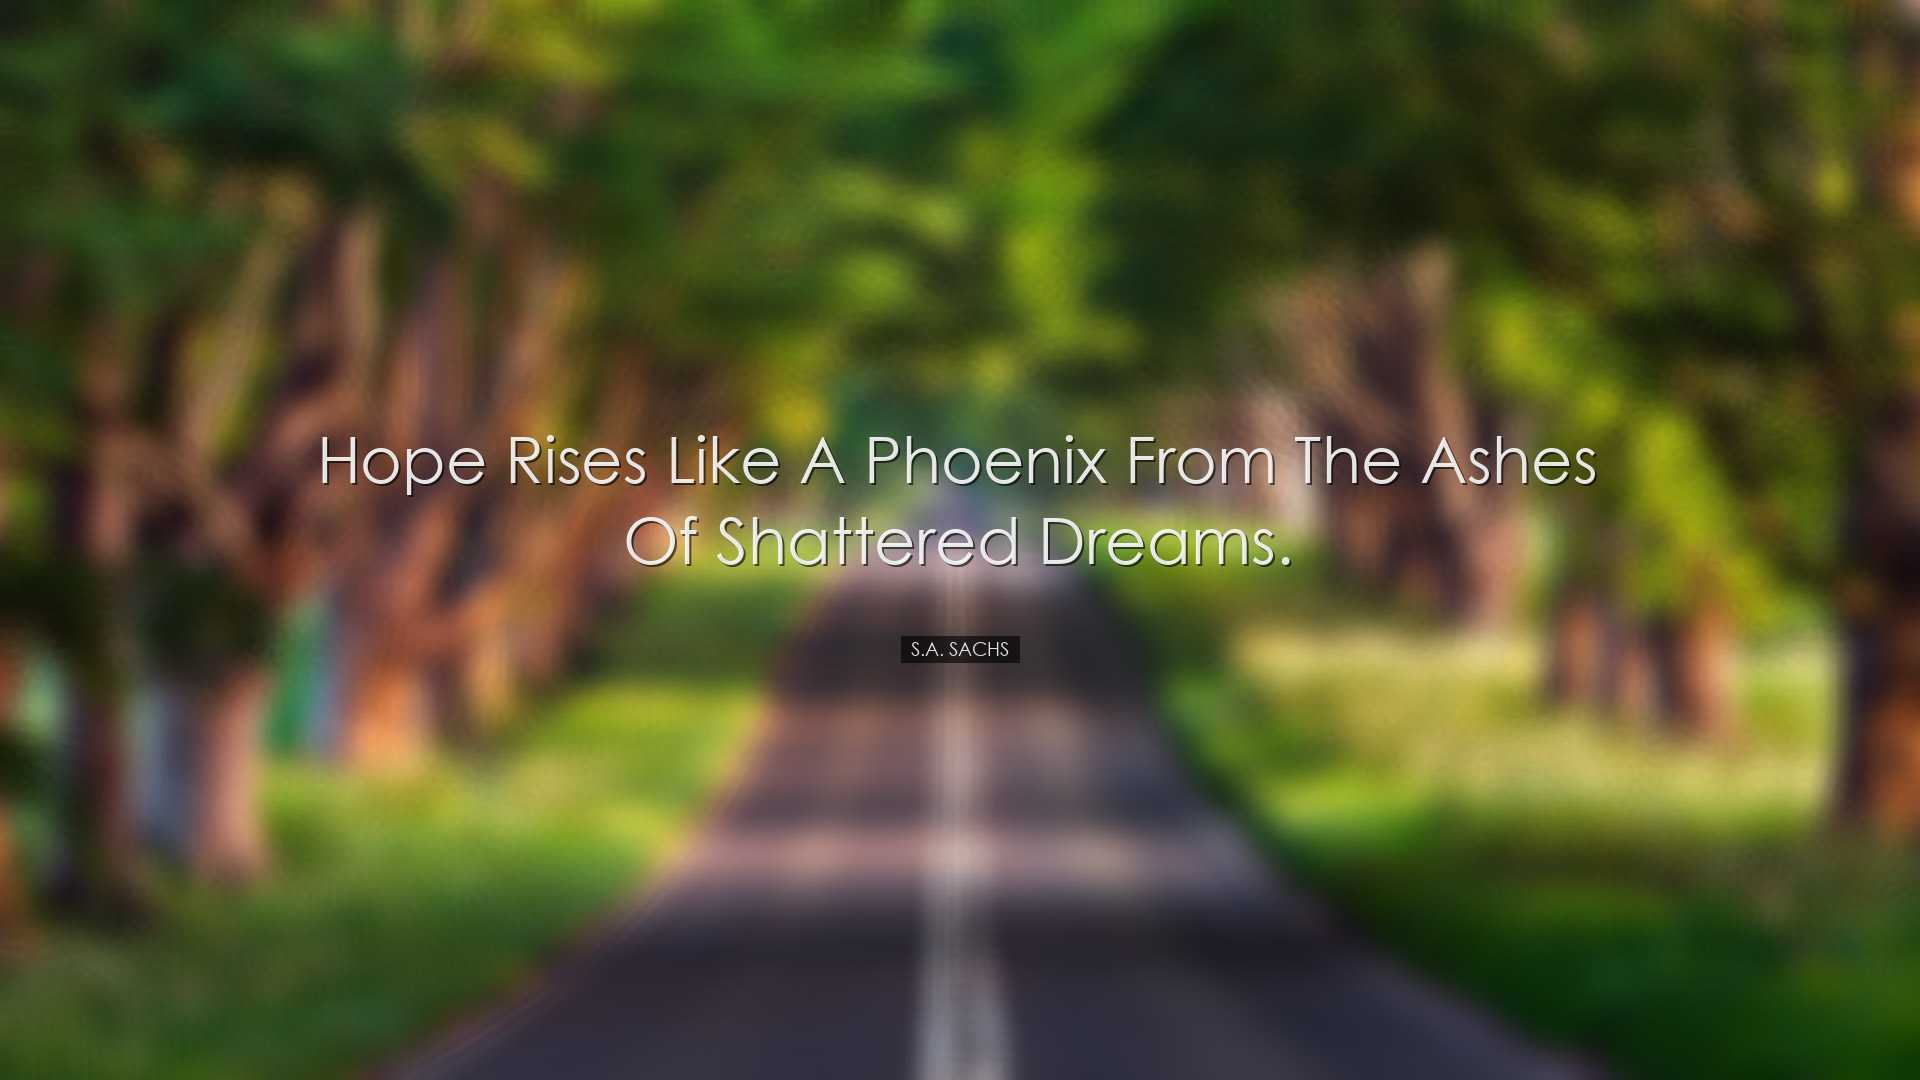 Hope rises like a phoenix from the ashes of shattered dreams. - S.